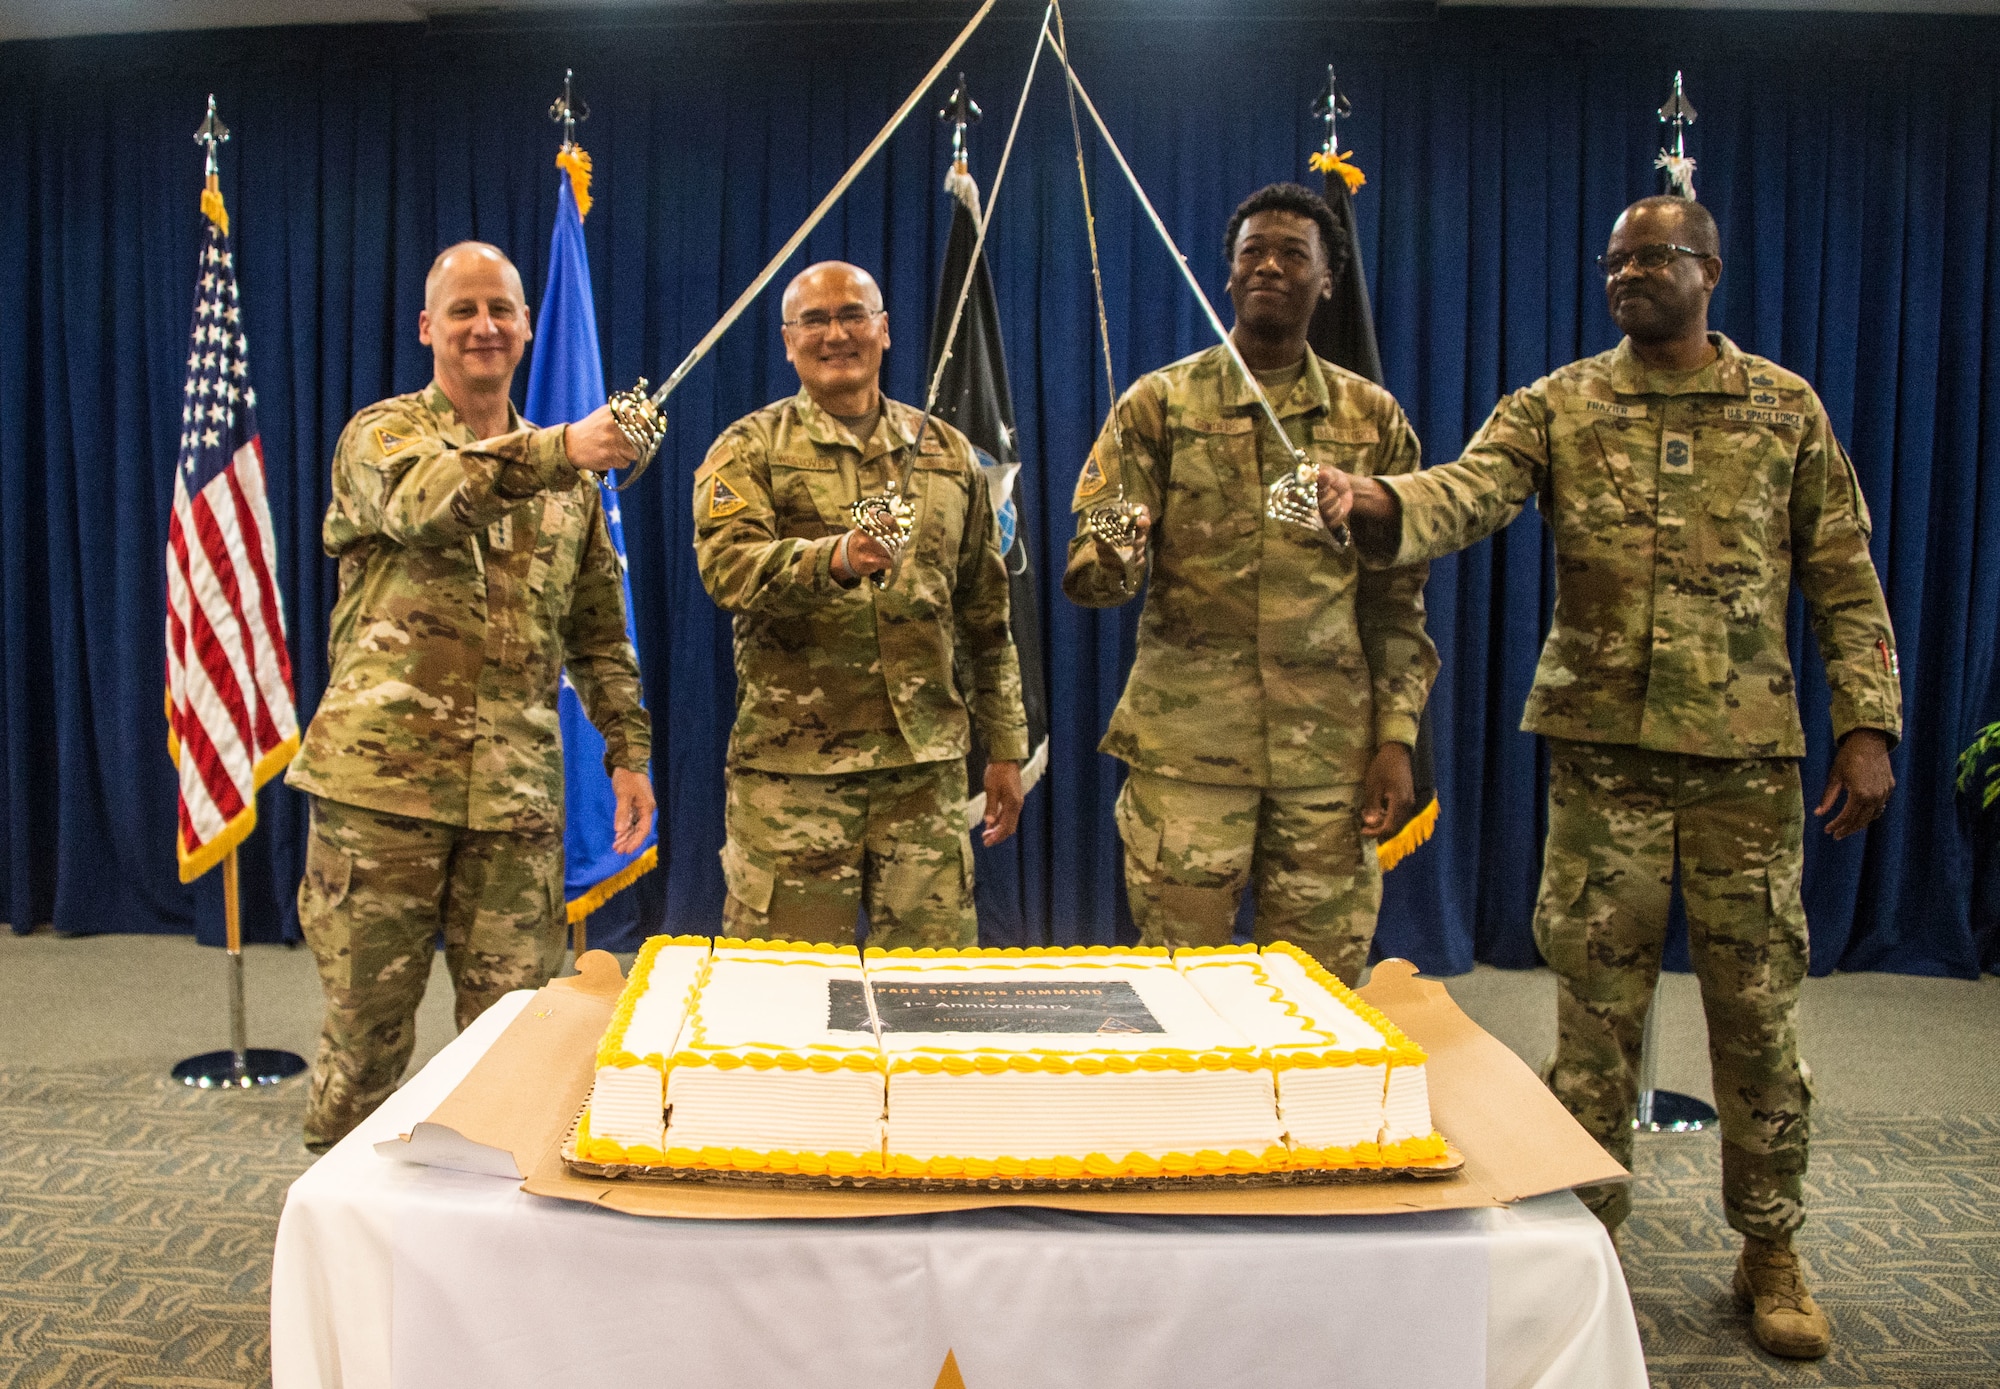 SSC Commander, Lt. Gen. Michael A. Guetlein (left) and SSC Senior Enlisted Leader, CMSgt Willie H. Frazier II (right), conduct a ceremonial cake cutting with the oldest and youngest member of the command. Space Systems Command commemorated its one-year anniversary of as a USSF Field Command, at Los Angeles Air Force Base, El Segundo, Calif., August 12, 2022. (U.S. Space Force photo by Van Ha)